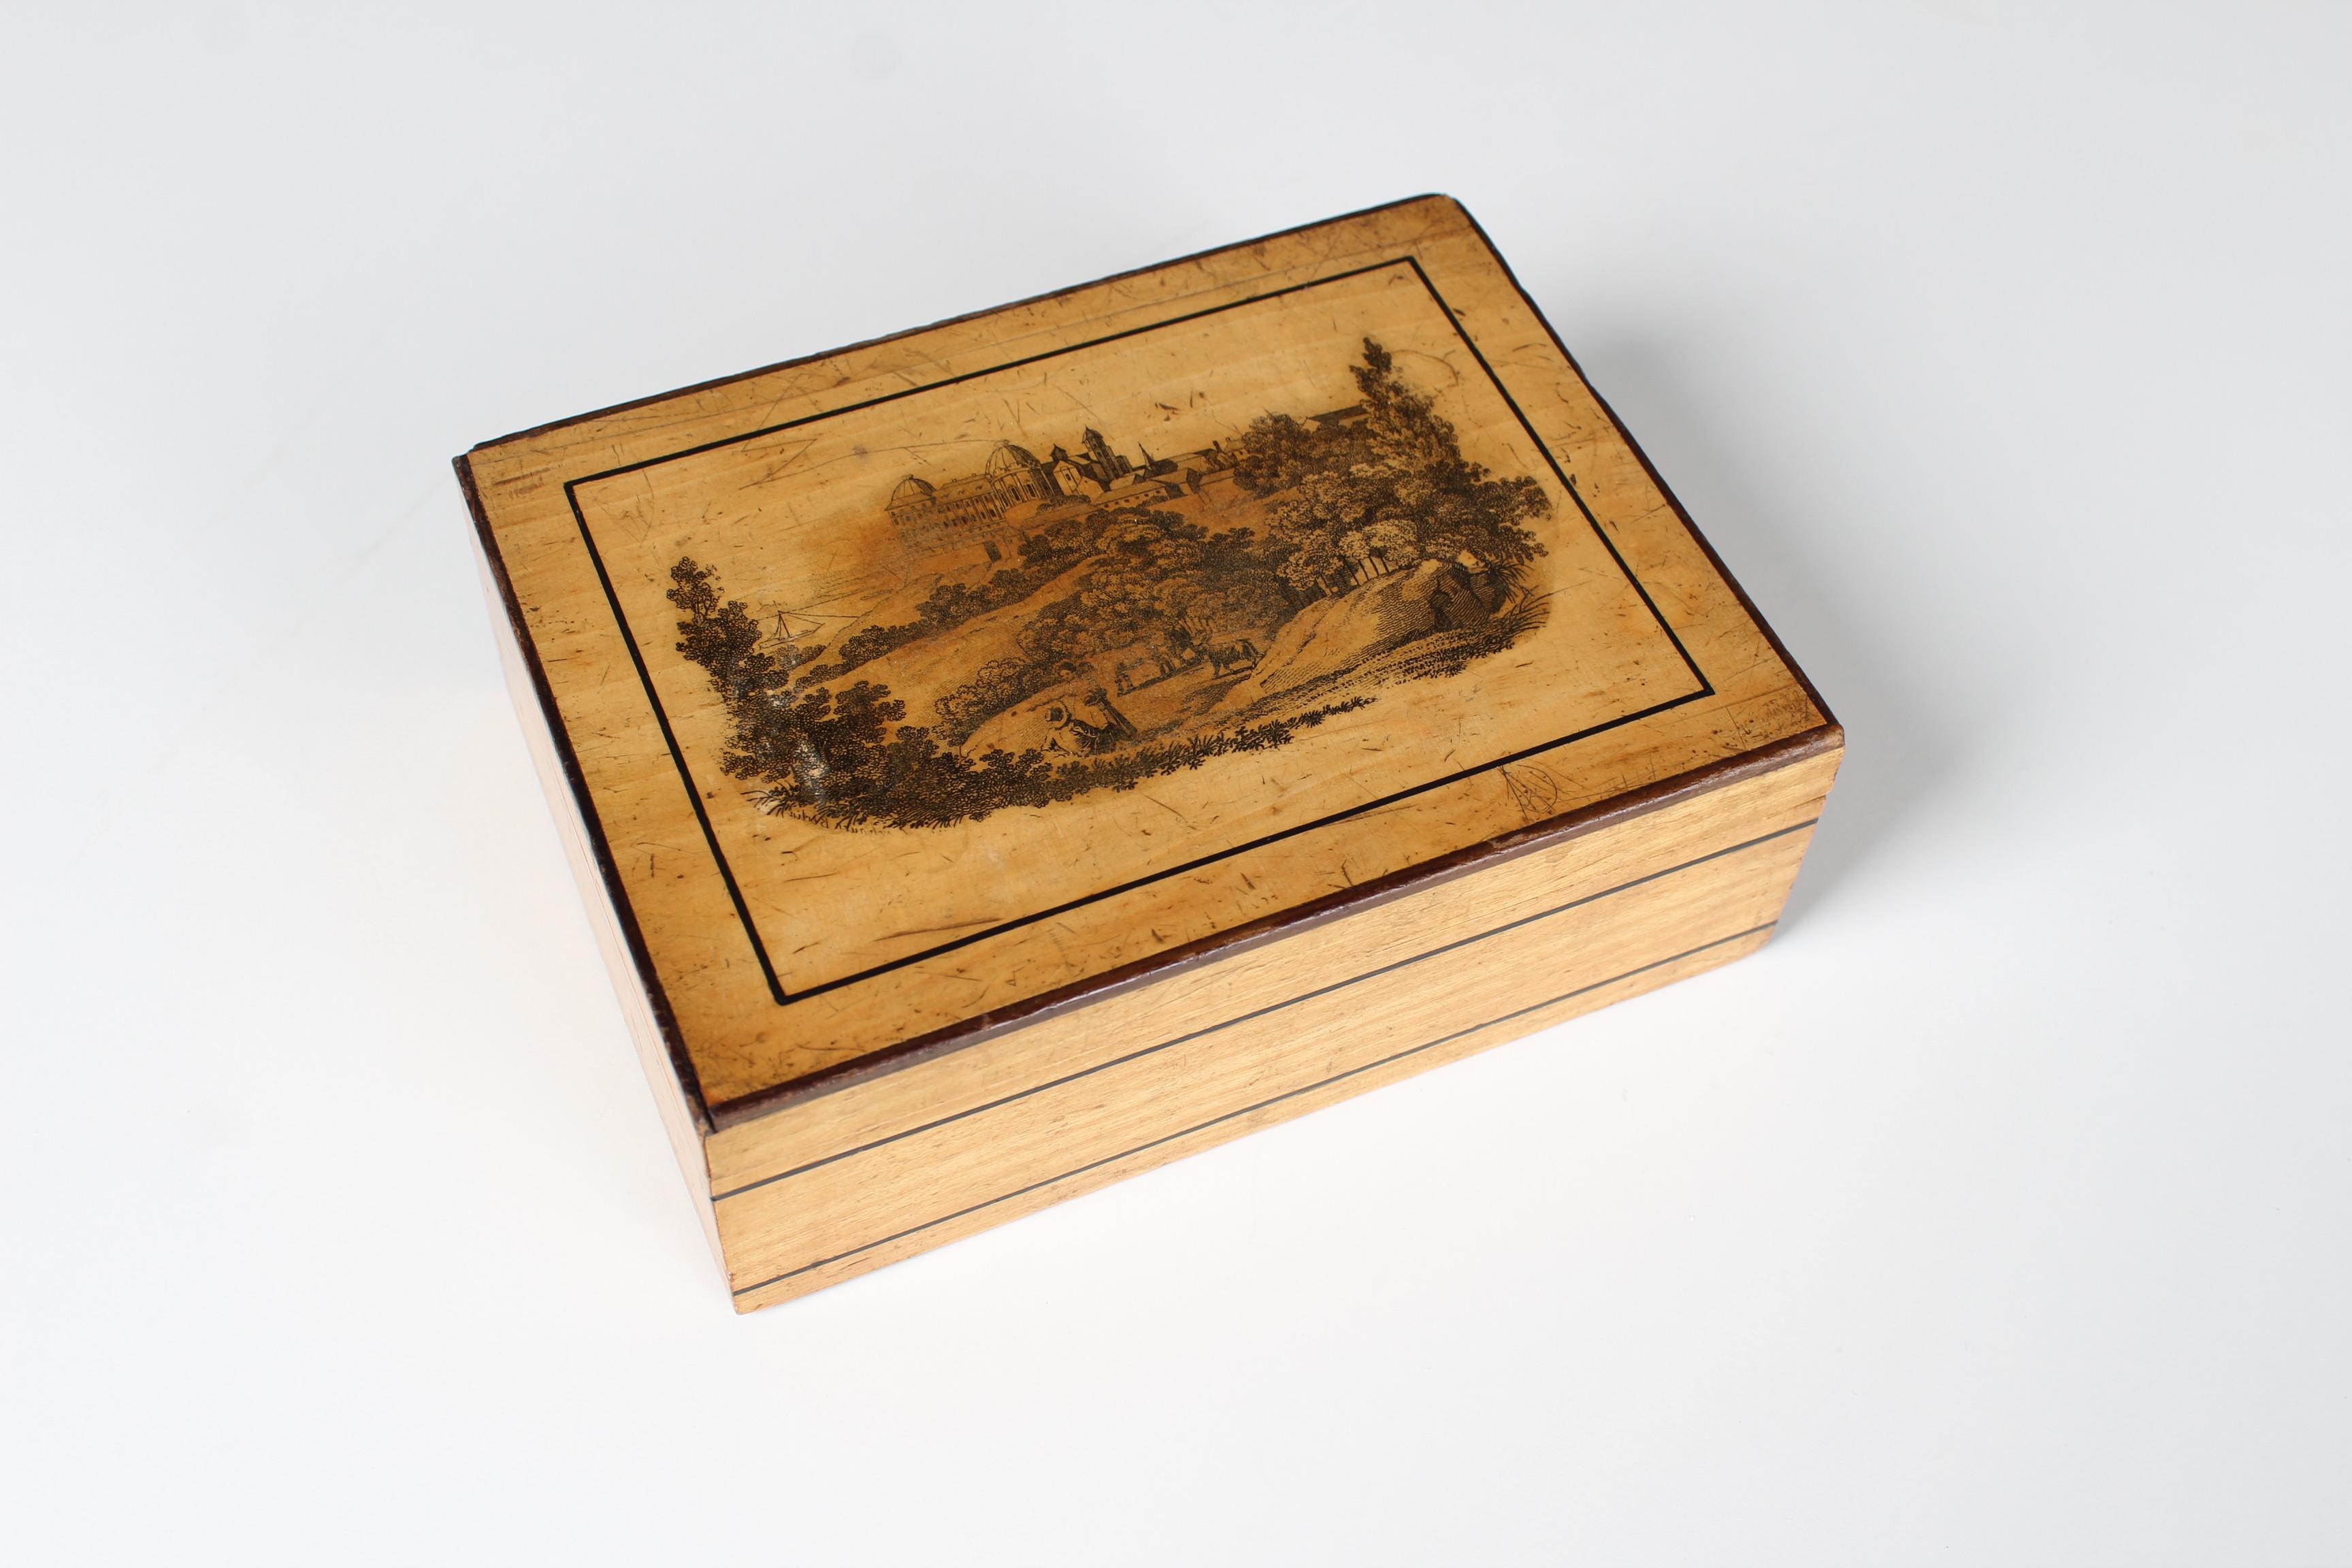 Antique Wood Box With Transfer Print Technique, Around 1900 For Sale 3